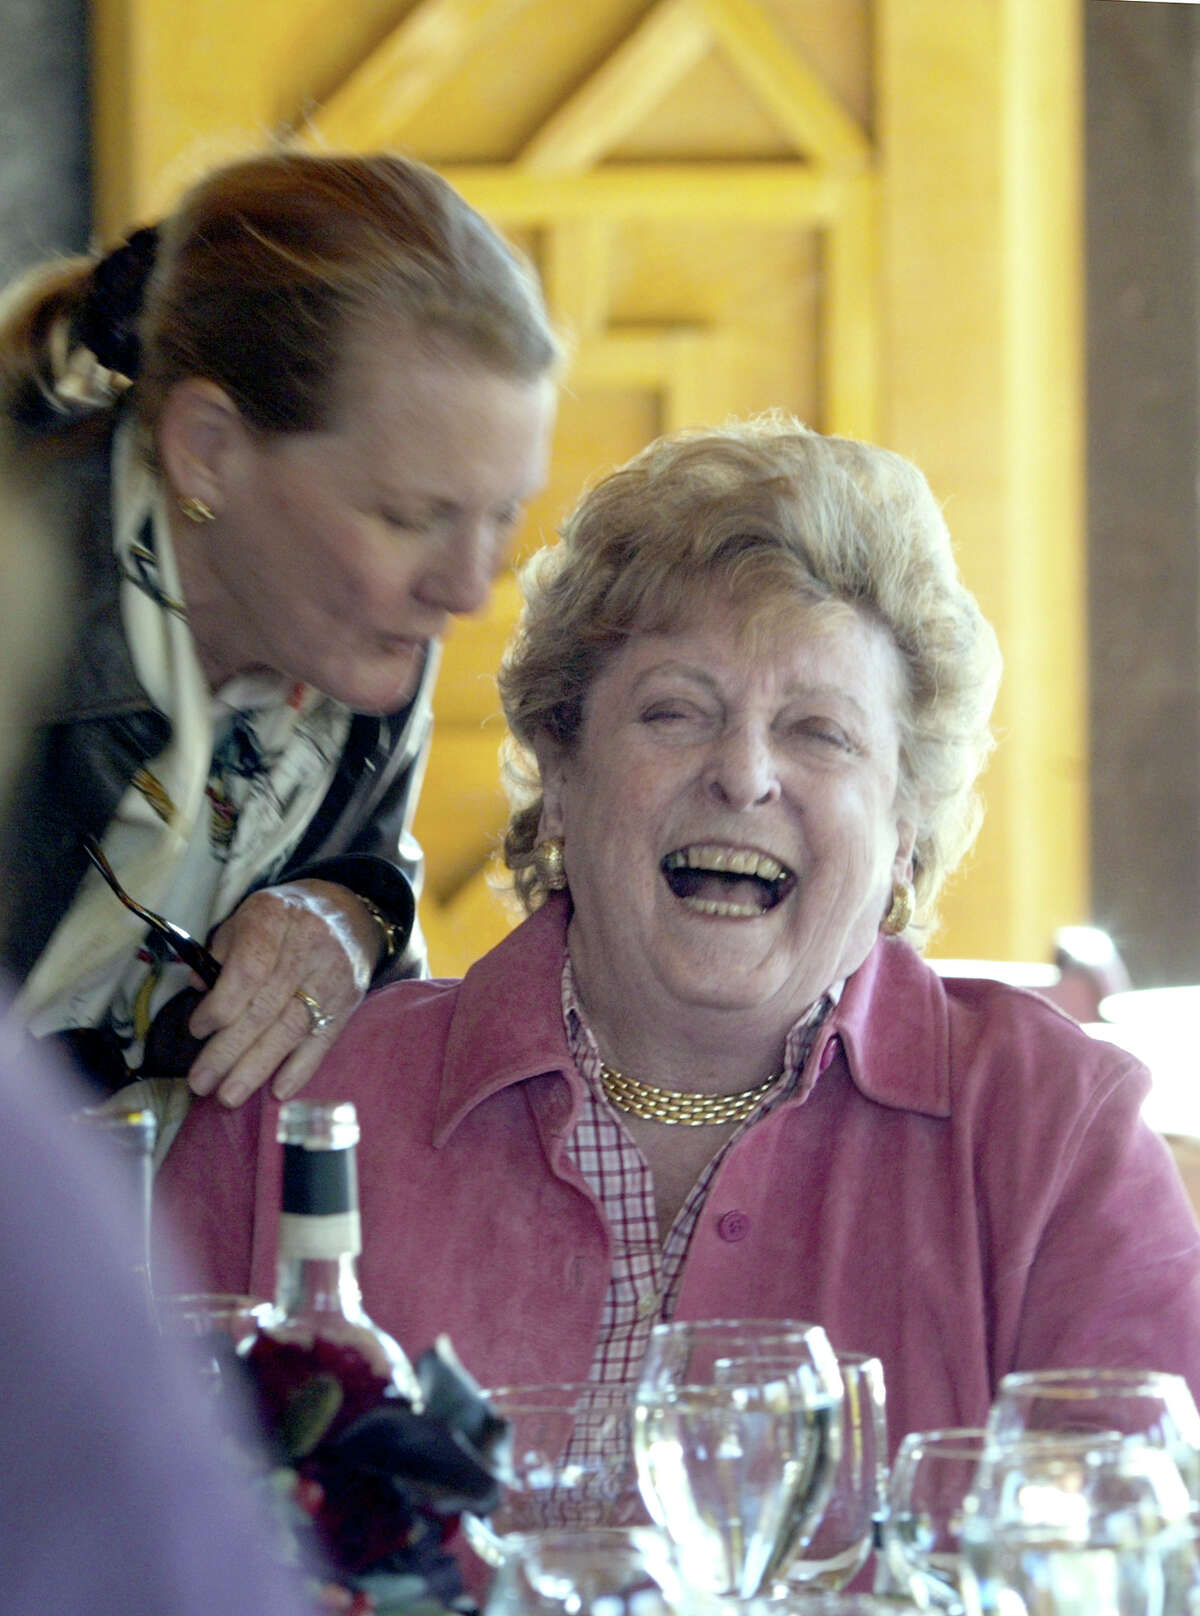 Nan McEvoy enjoyed a light moment with a friend at her Petaluma olive ranch. By Brant Ward/Chronicle